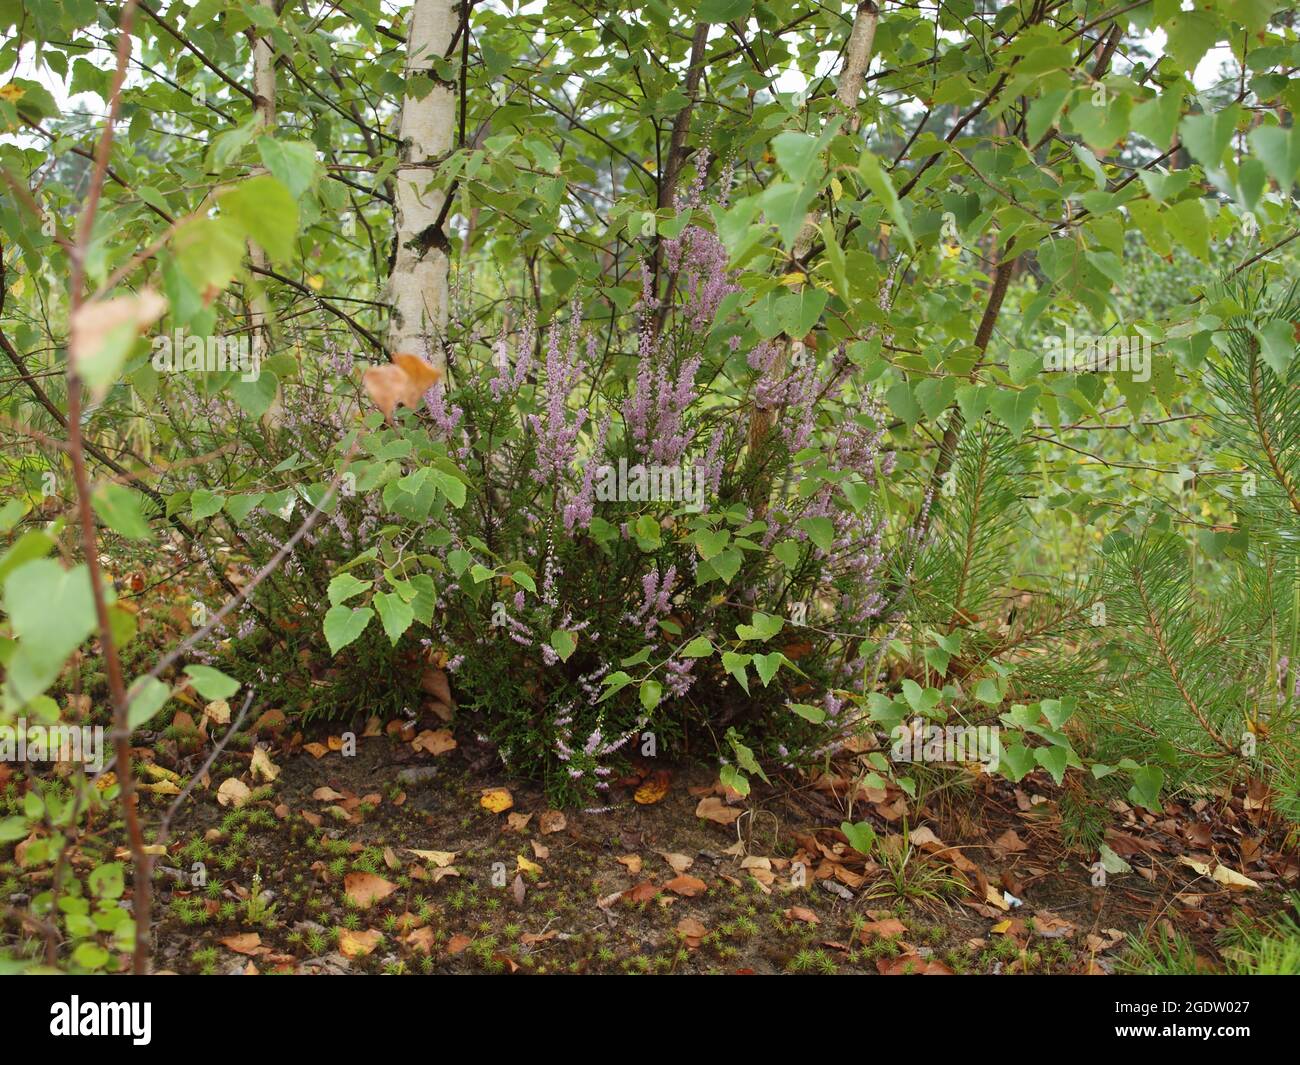 Heather bush on the background of birch trunks in the summer forest. Stock Photo